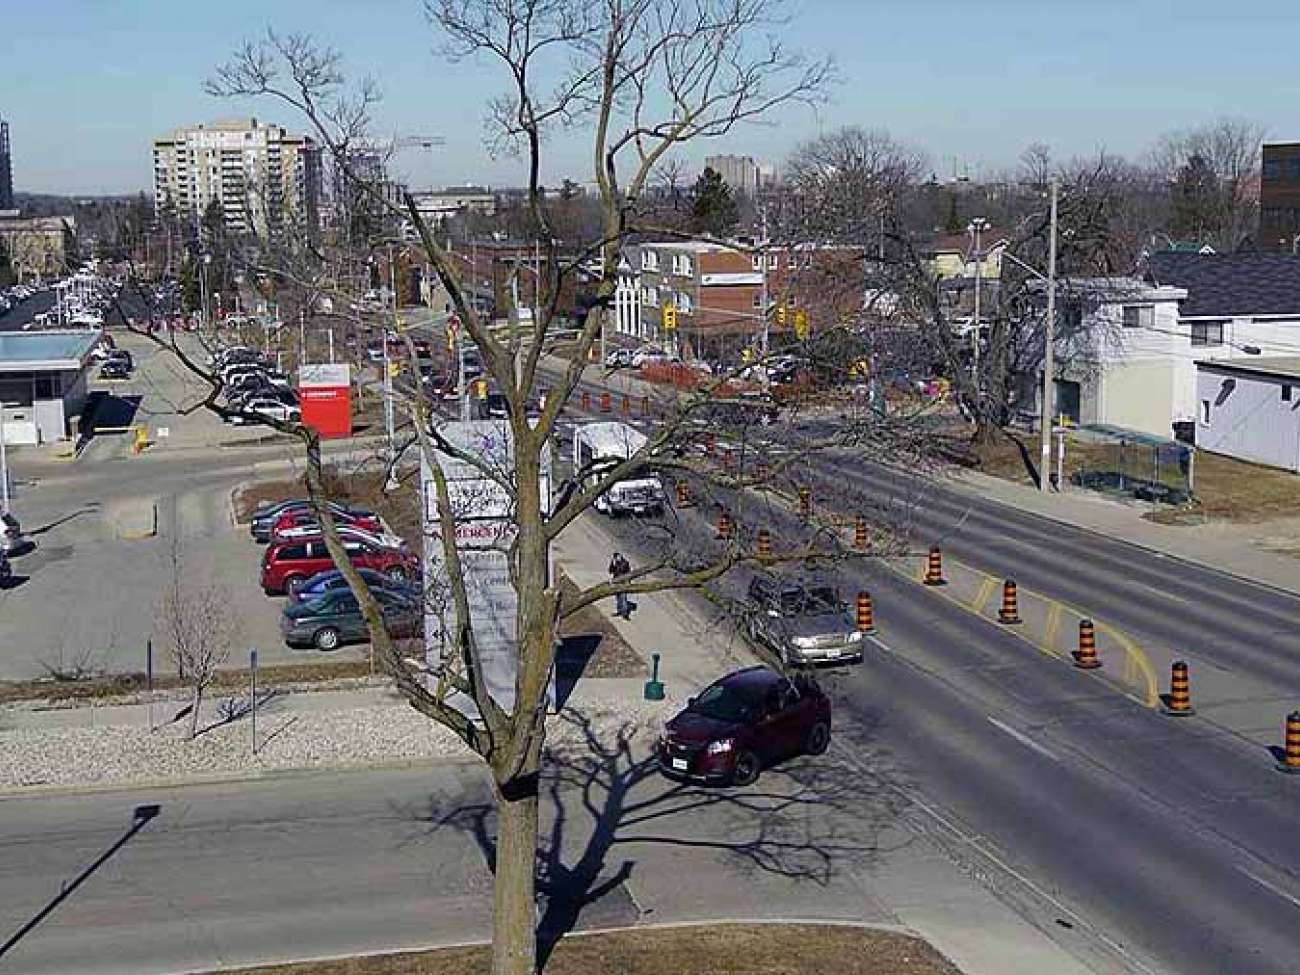 April 2015: King St. prior to construction